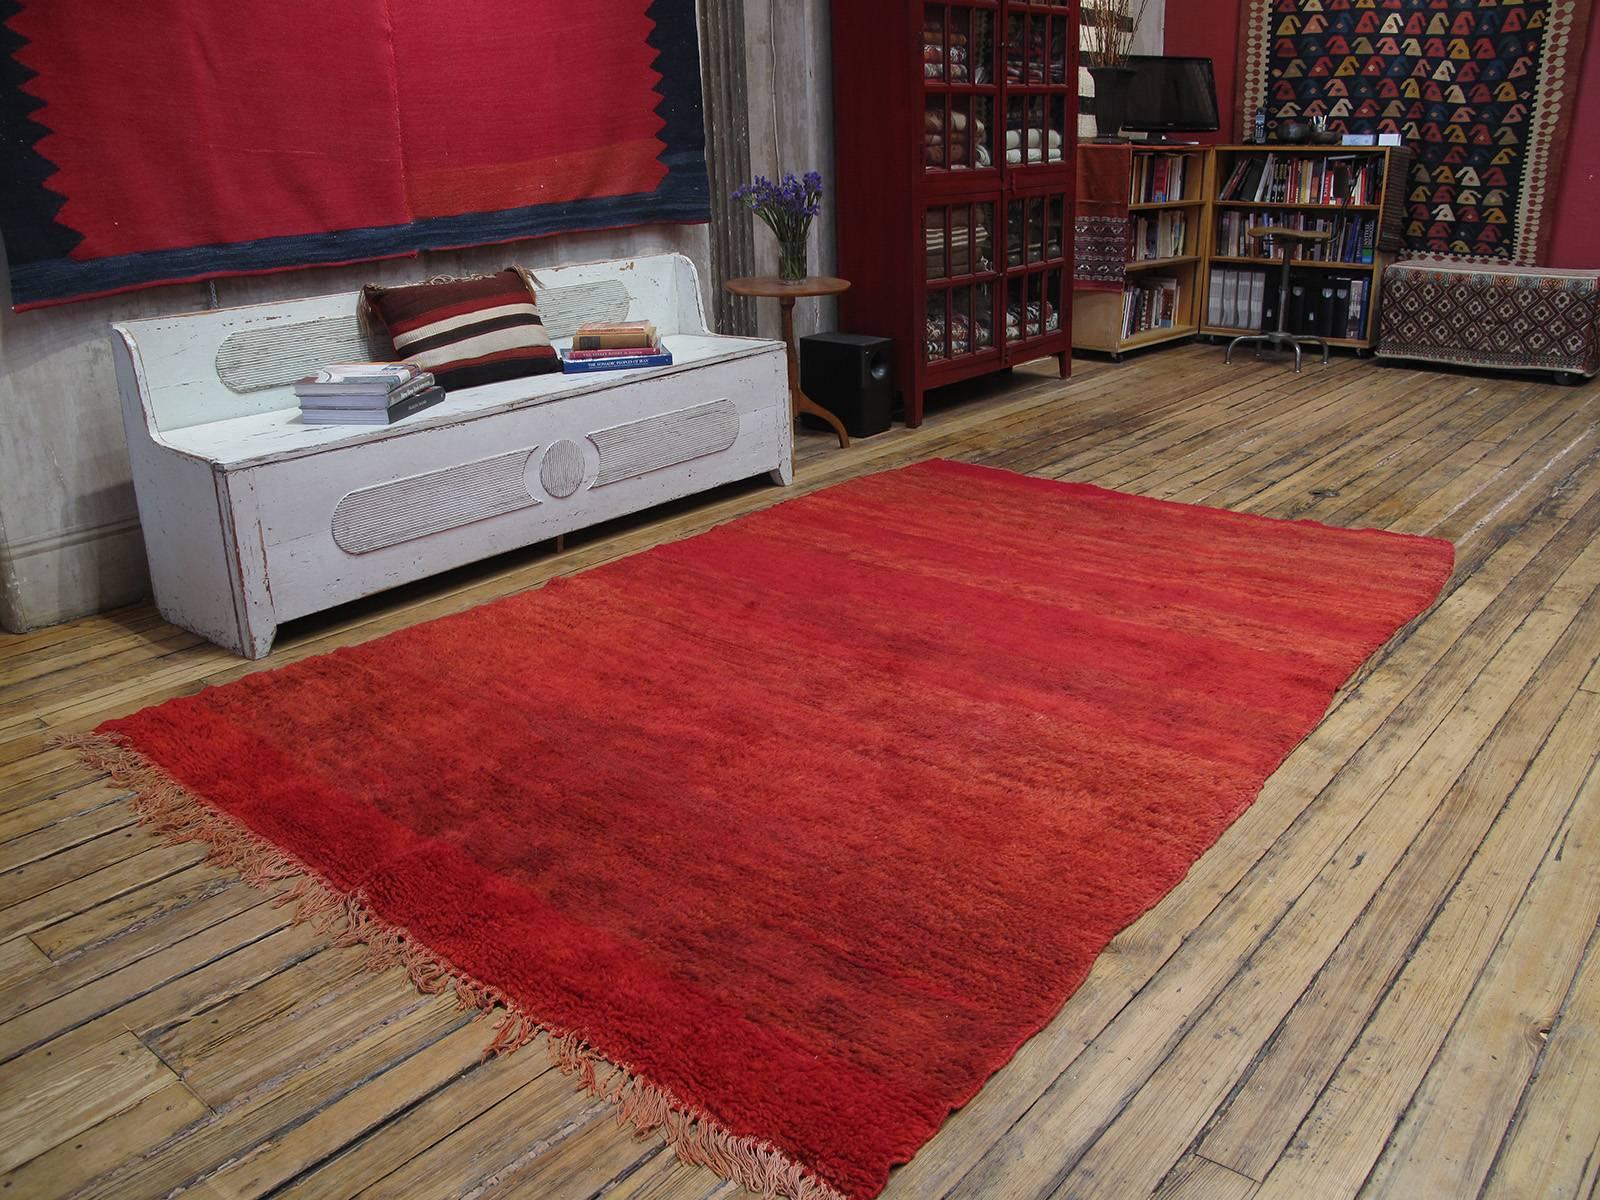 Red Beni Mguild Moroccan Berber rug. An old Moroccan Berber rug from the Middle Atlas mountains, attributed to the Beni Mguild tribes. Monochromatic rugs, with variations in color intensity and with minimal or no motifs, are typical for this tribe